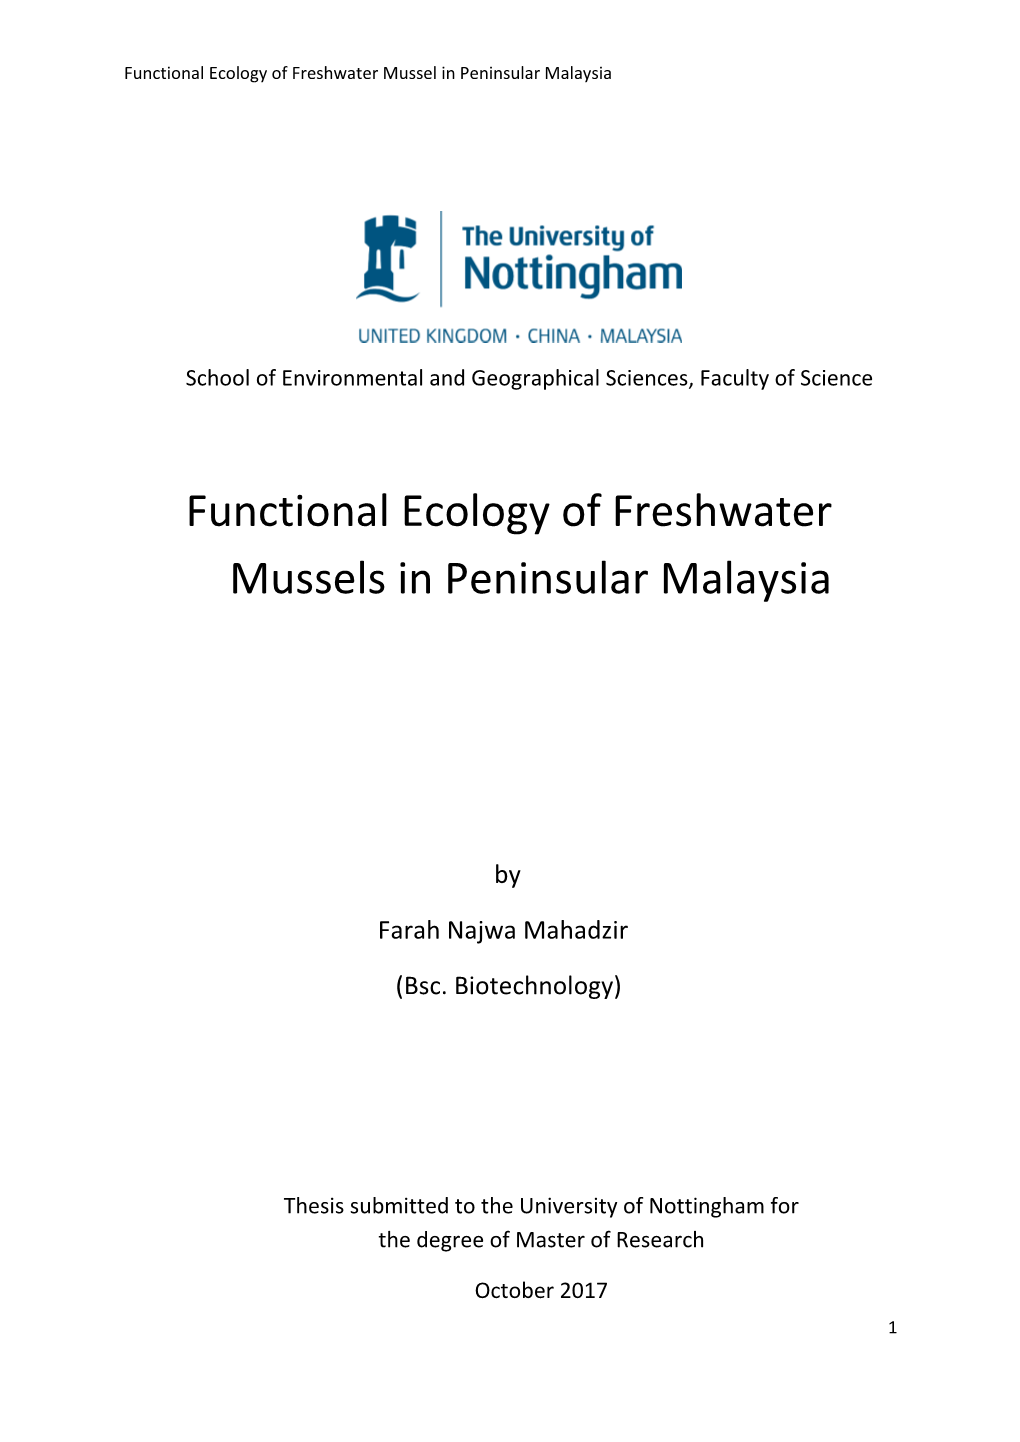 Functional Ecology of Freshwater Mussels in Peninsular Malaysia